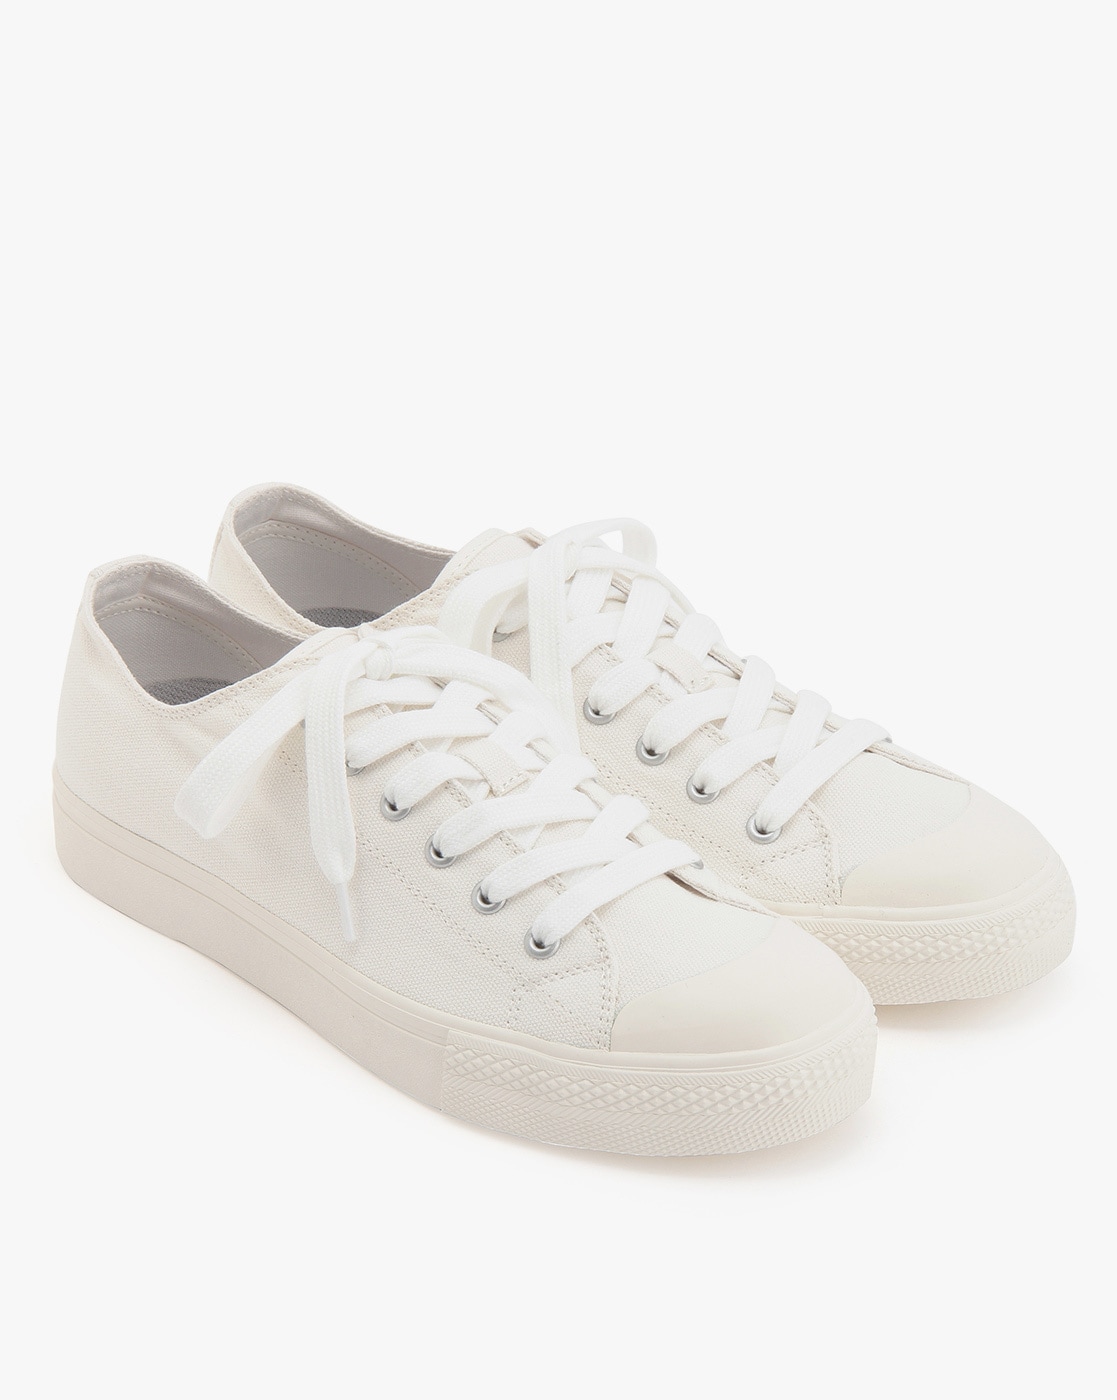 white sneakers with support